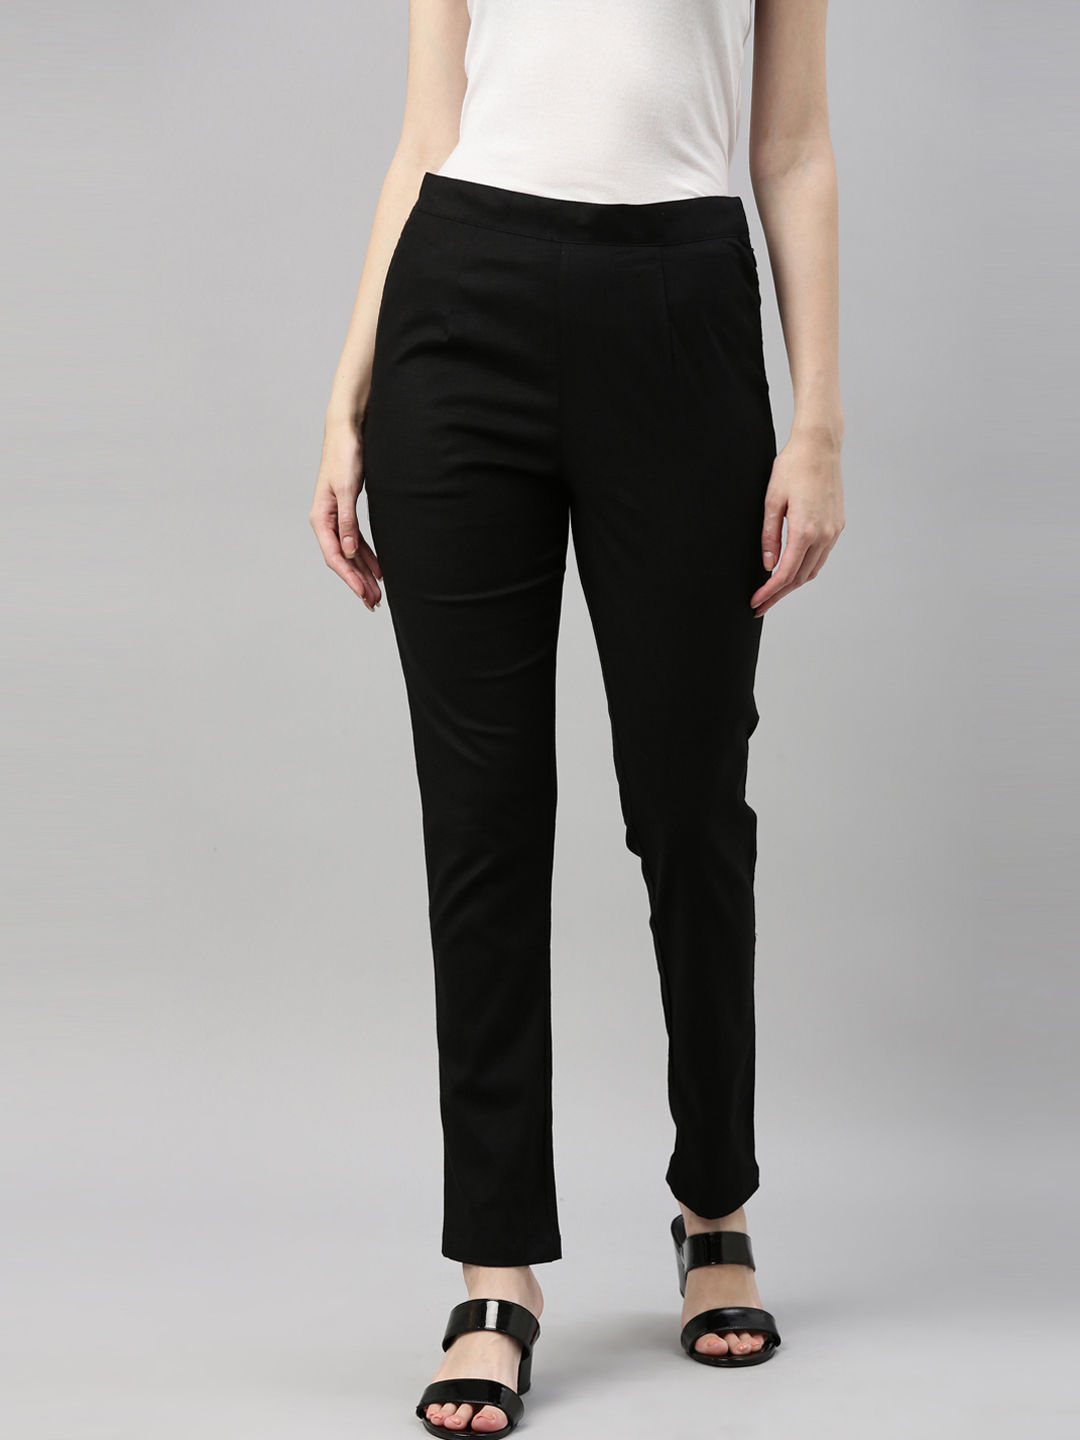 Buy Phase Eight Women Black Trousers Online  669137  The Collective